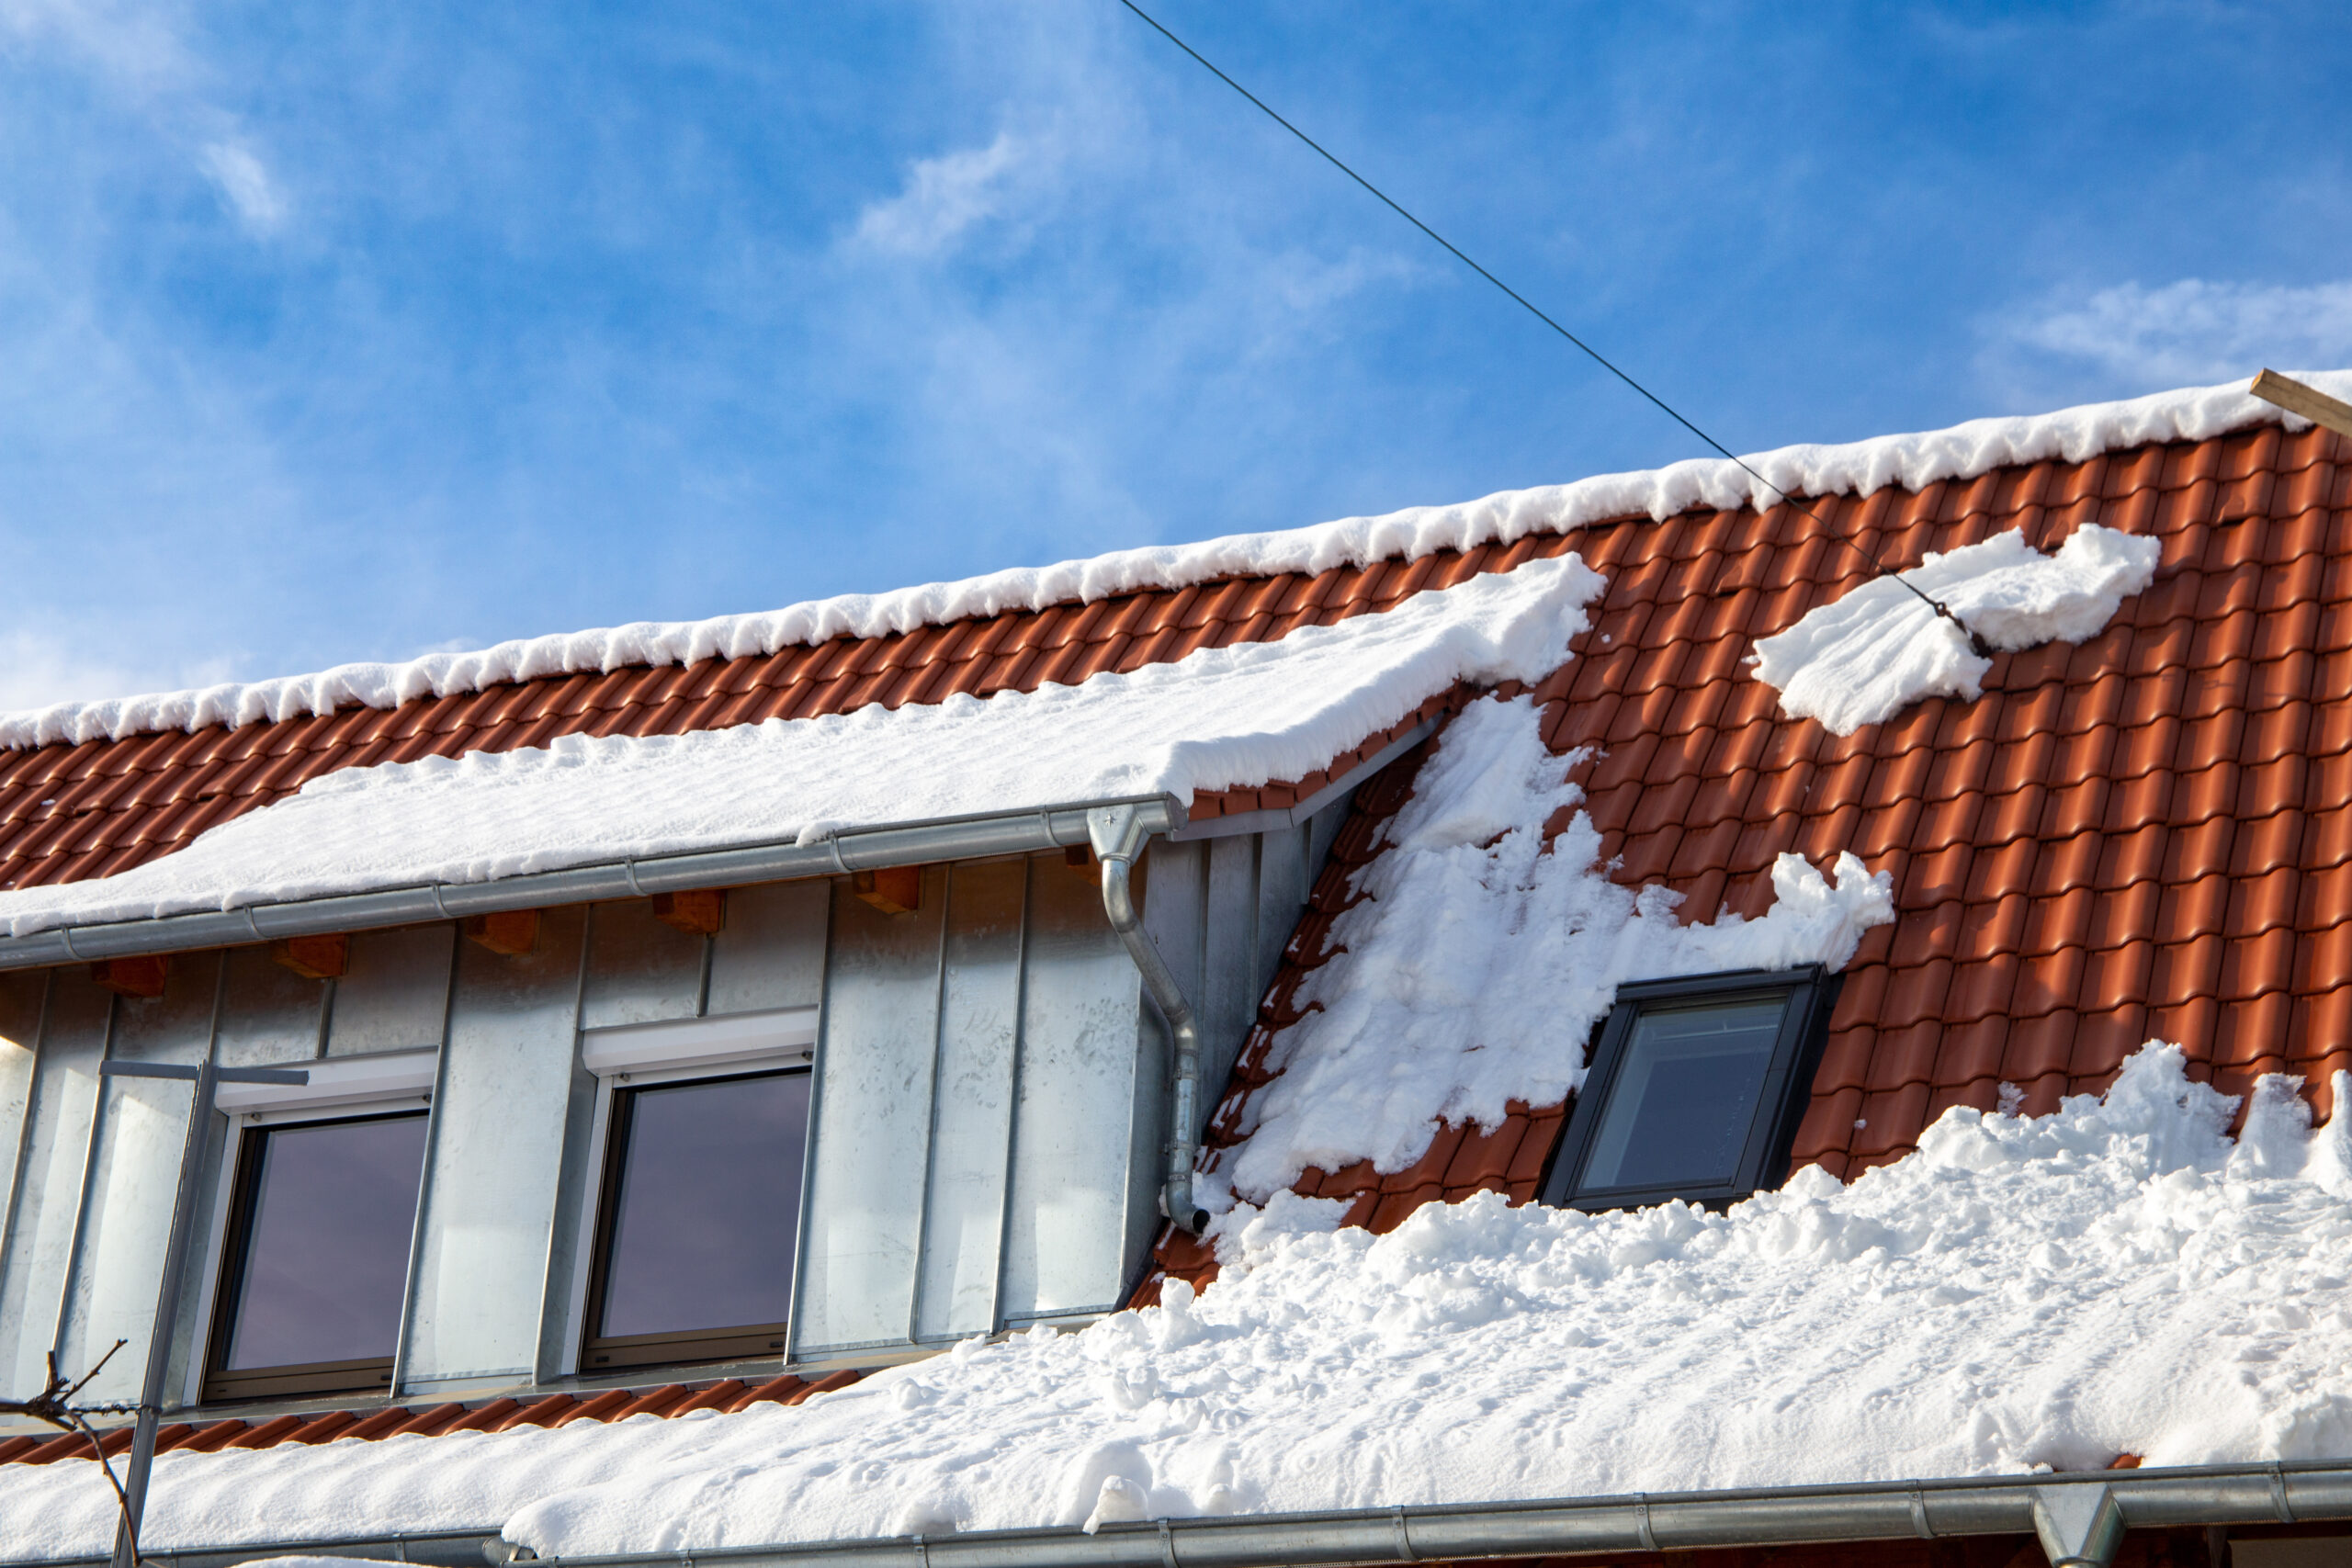 Symbol image of roof avalanche: Snow sliding down the tiled roof